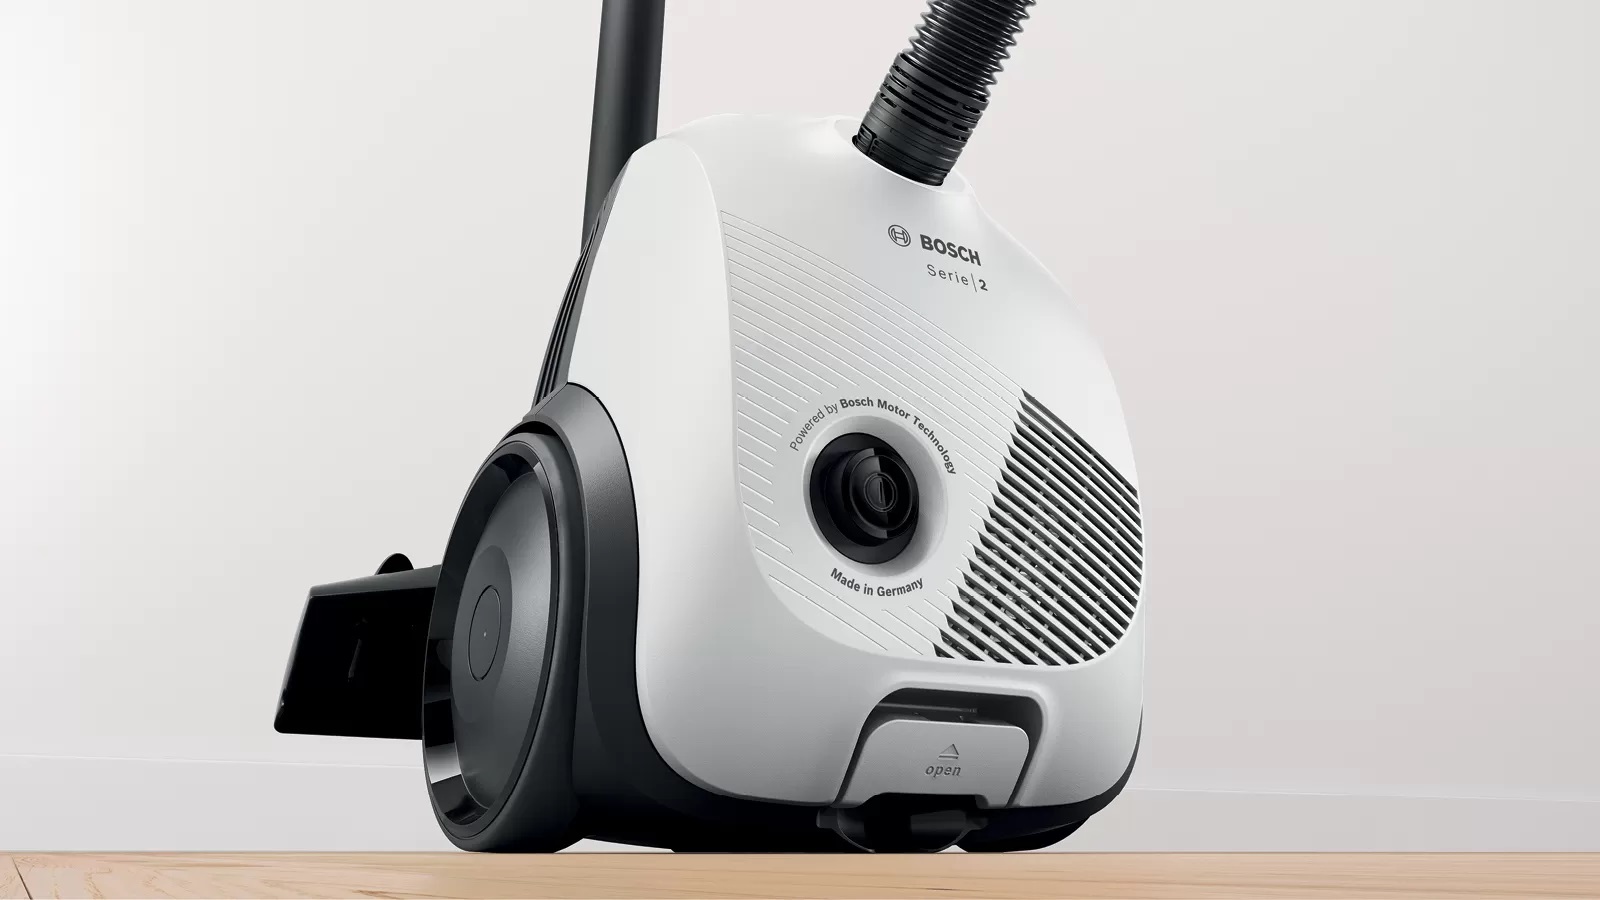 BOSCH BGLS2LW1 SERIE 2 VACUUM CLEANER WITH BAG - WHITE 600W